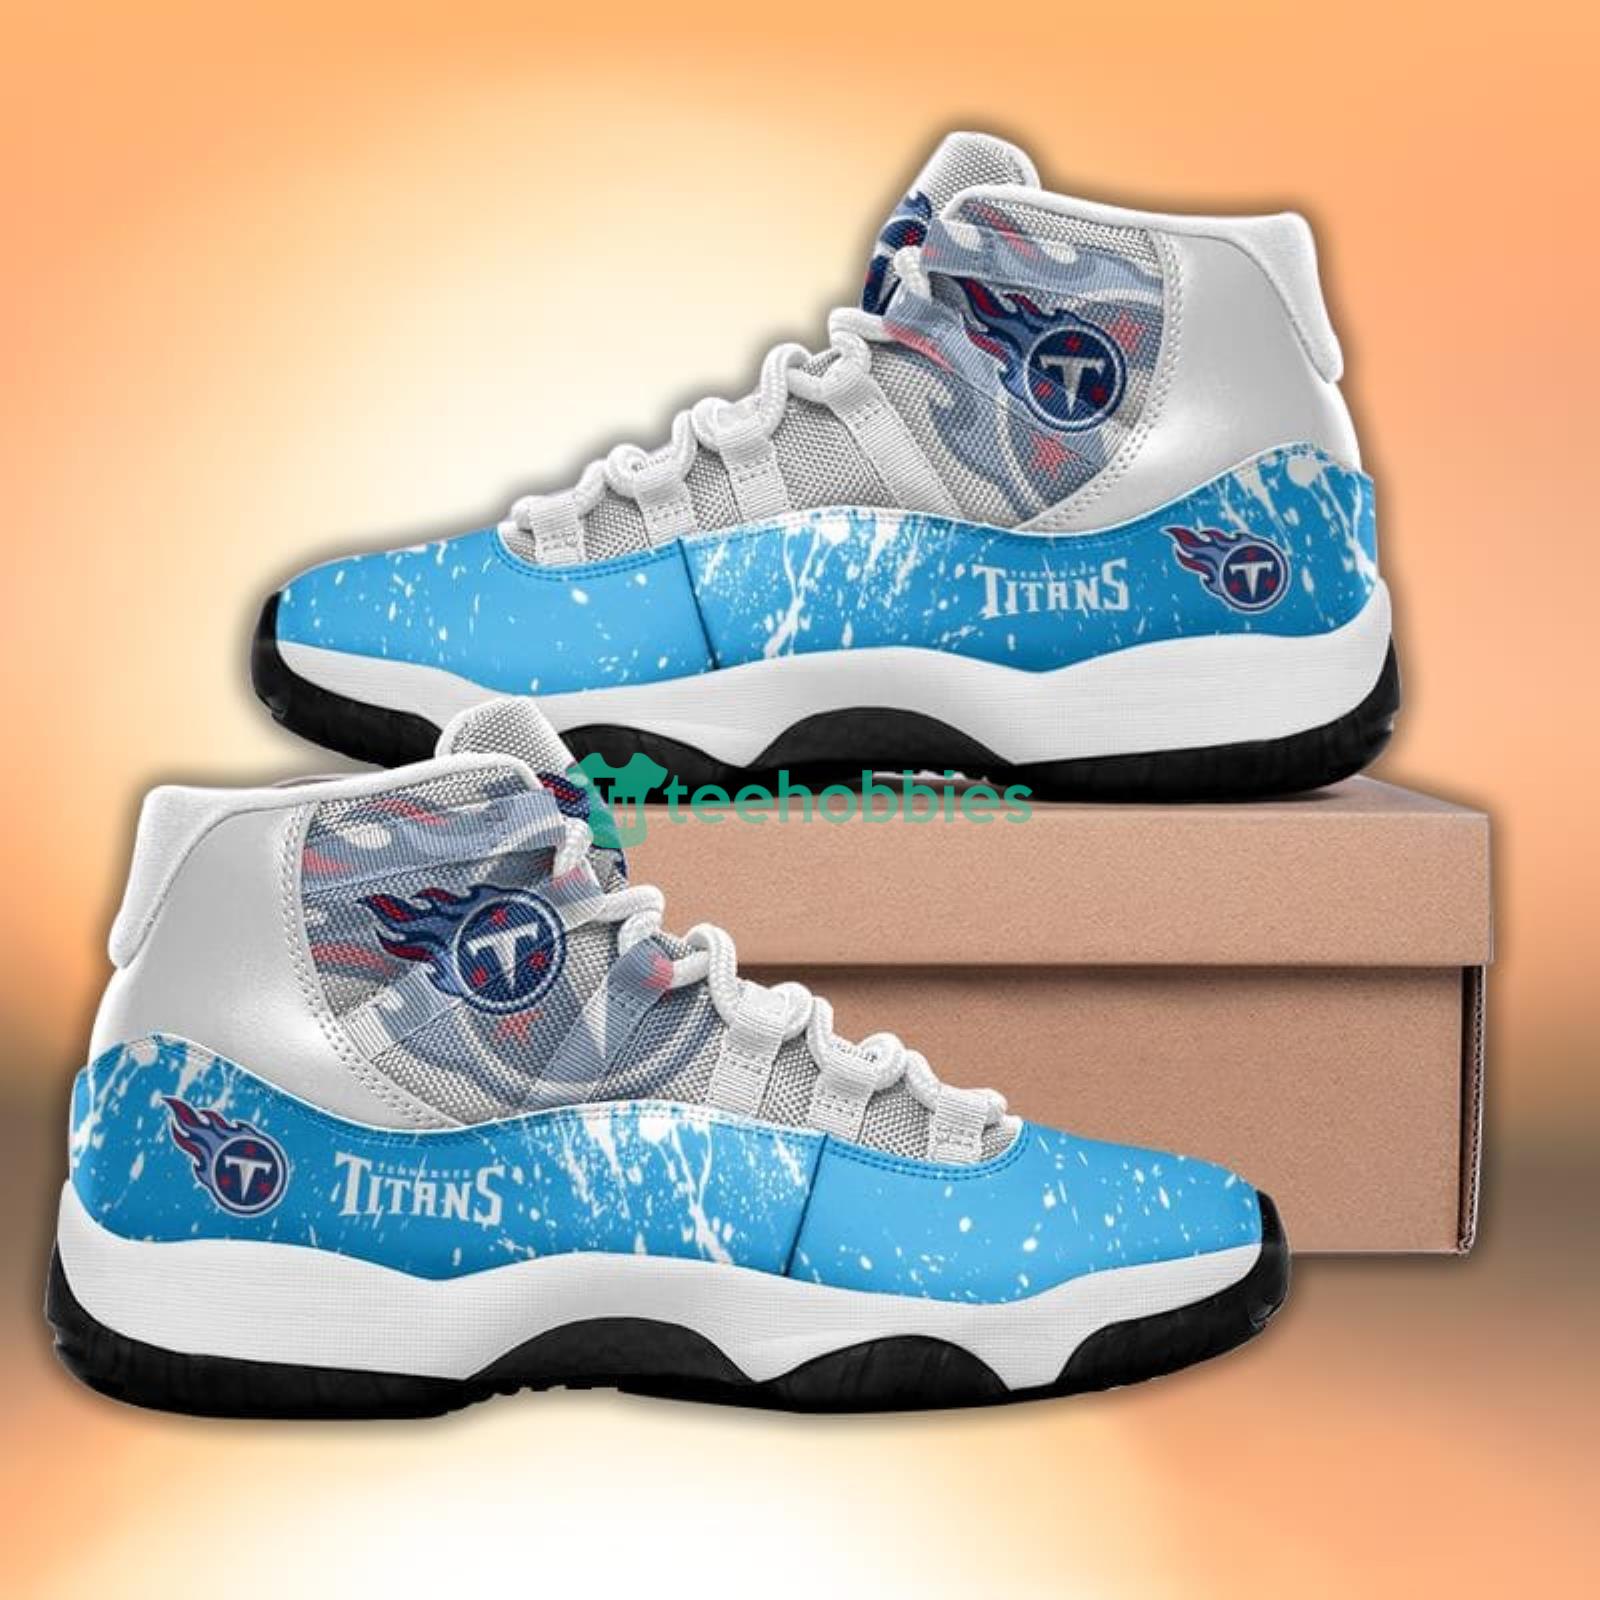 Tennessee Titans Paint Flakes Pattern Style Sneaker Air Jordan 11 Shoes